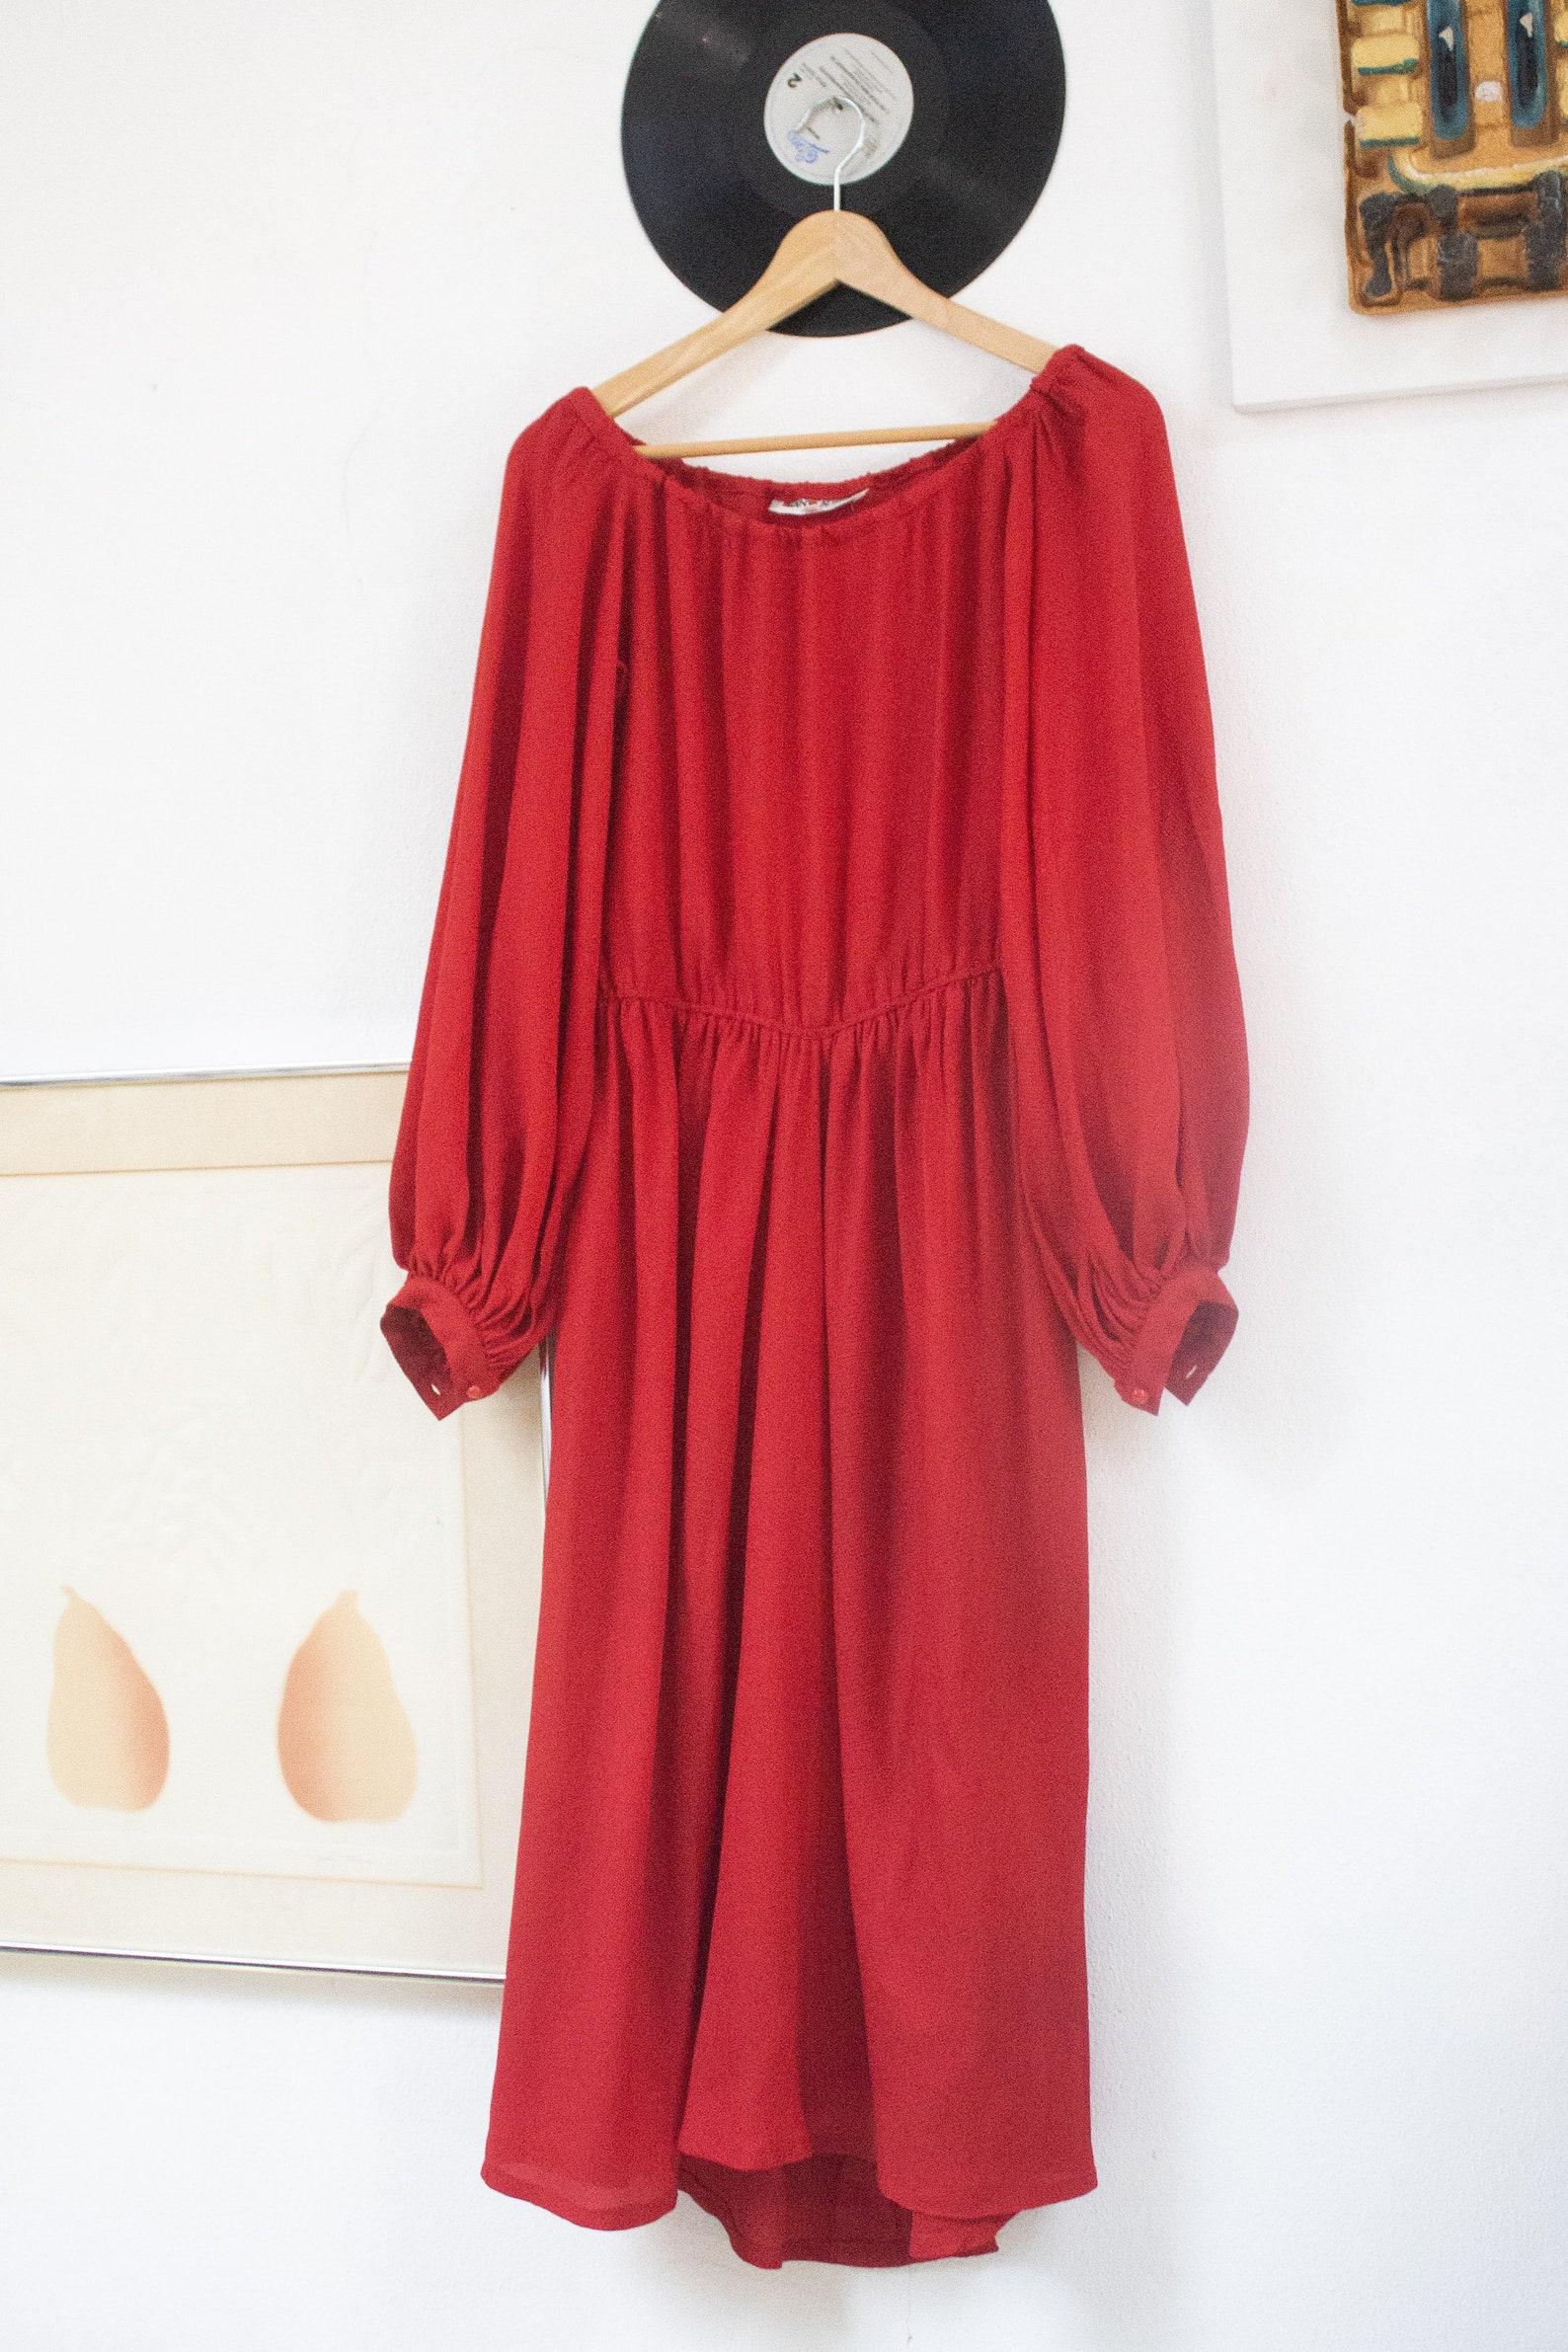 Saint Laurent Rive Gauche fall/winter 1977 red silk off shoulders midi dress with elastic pleated waistline and exaggerated bishop sleeves (S)
Rare and collectible item from Saint Laurent Rive Gauche fall/winter 1977 
100% silk
One button on each